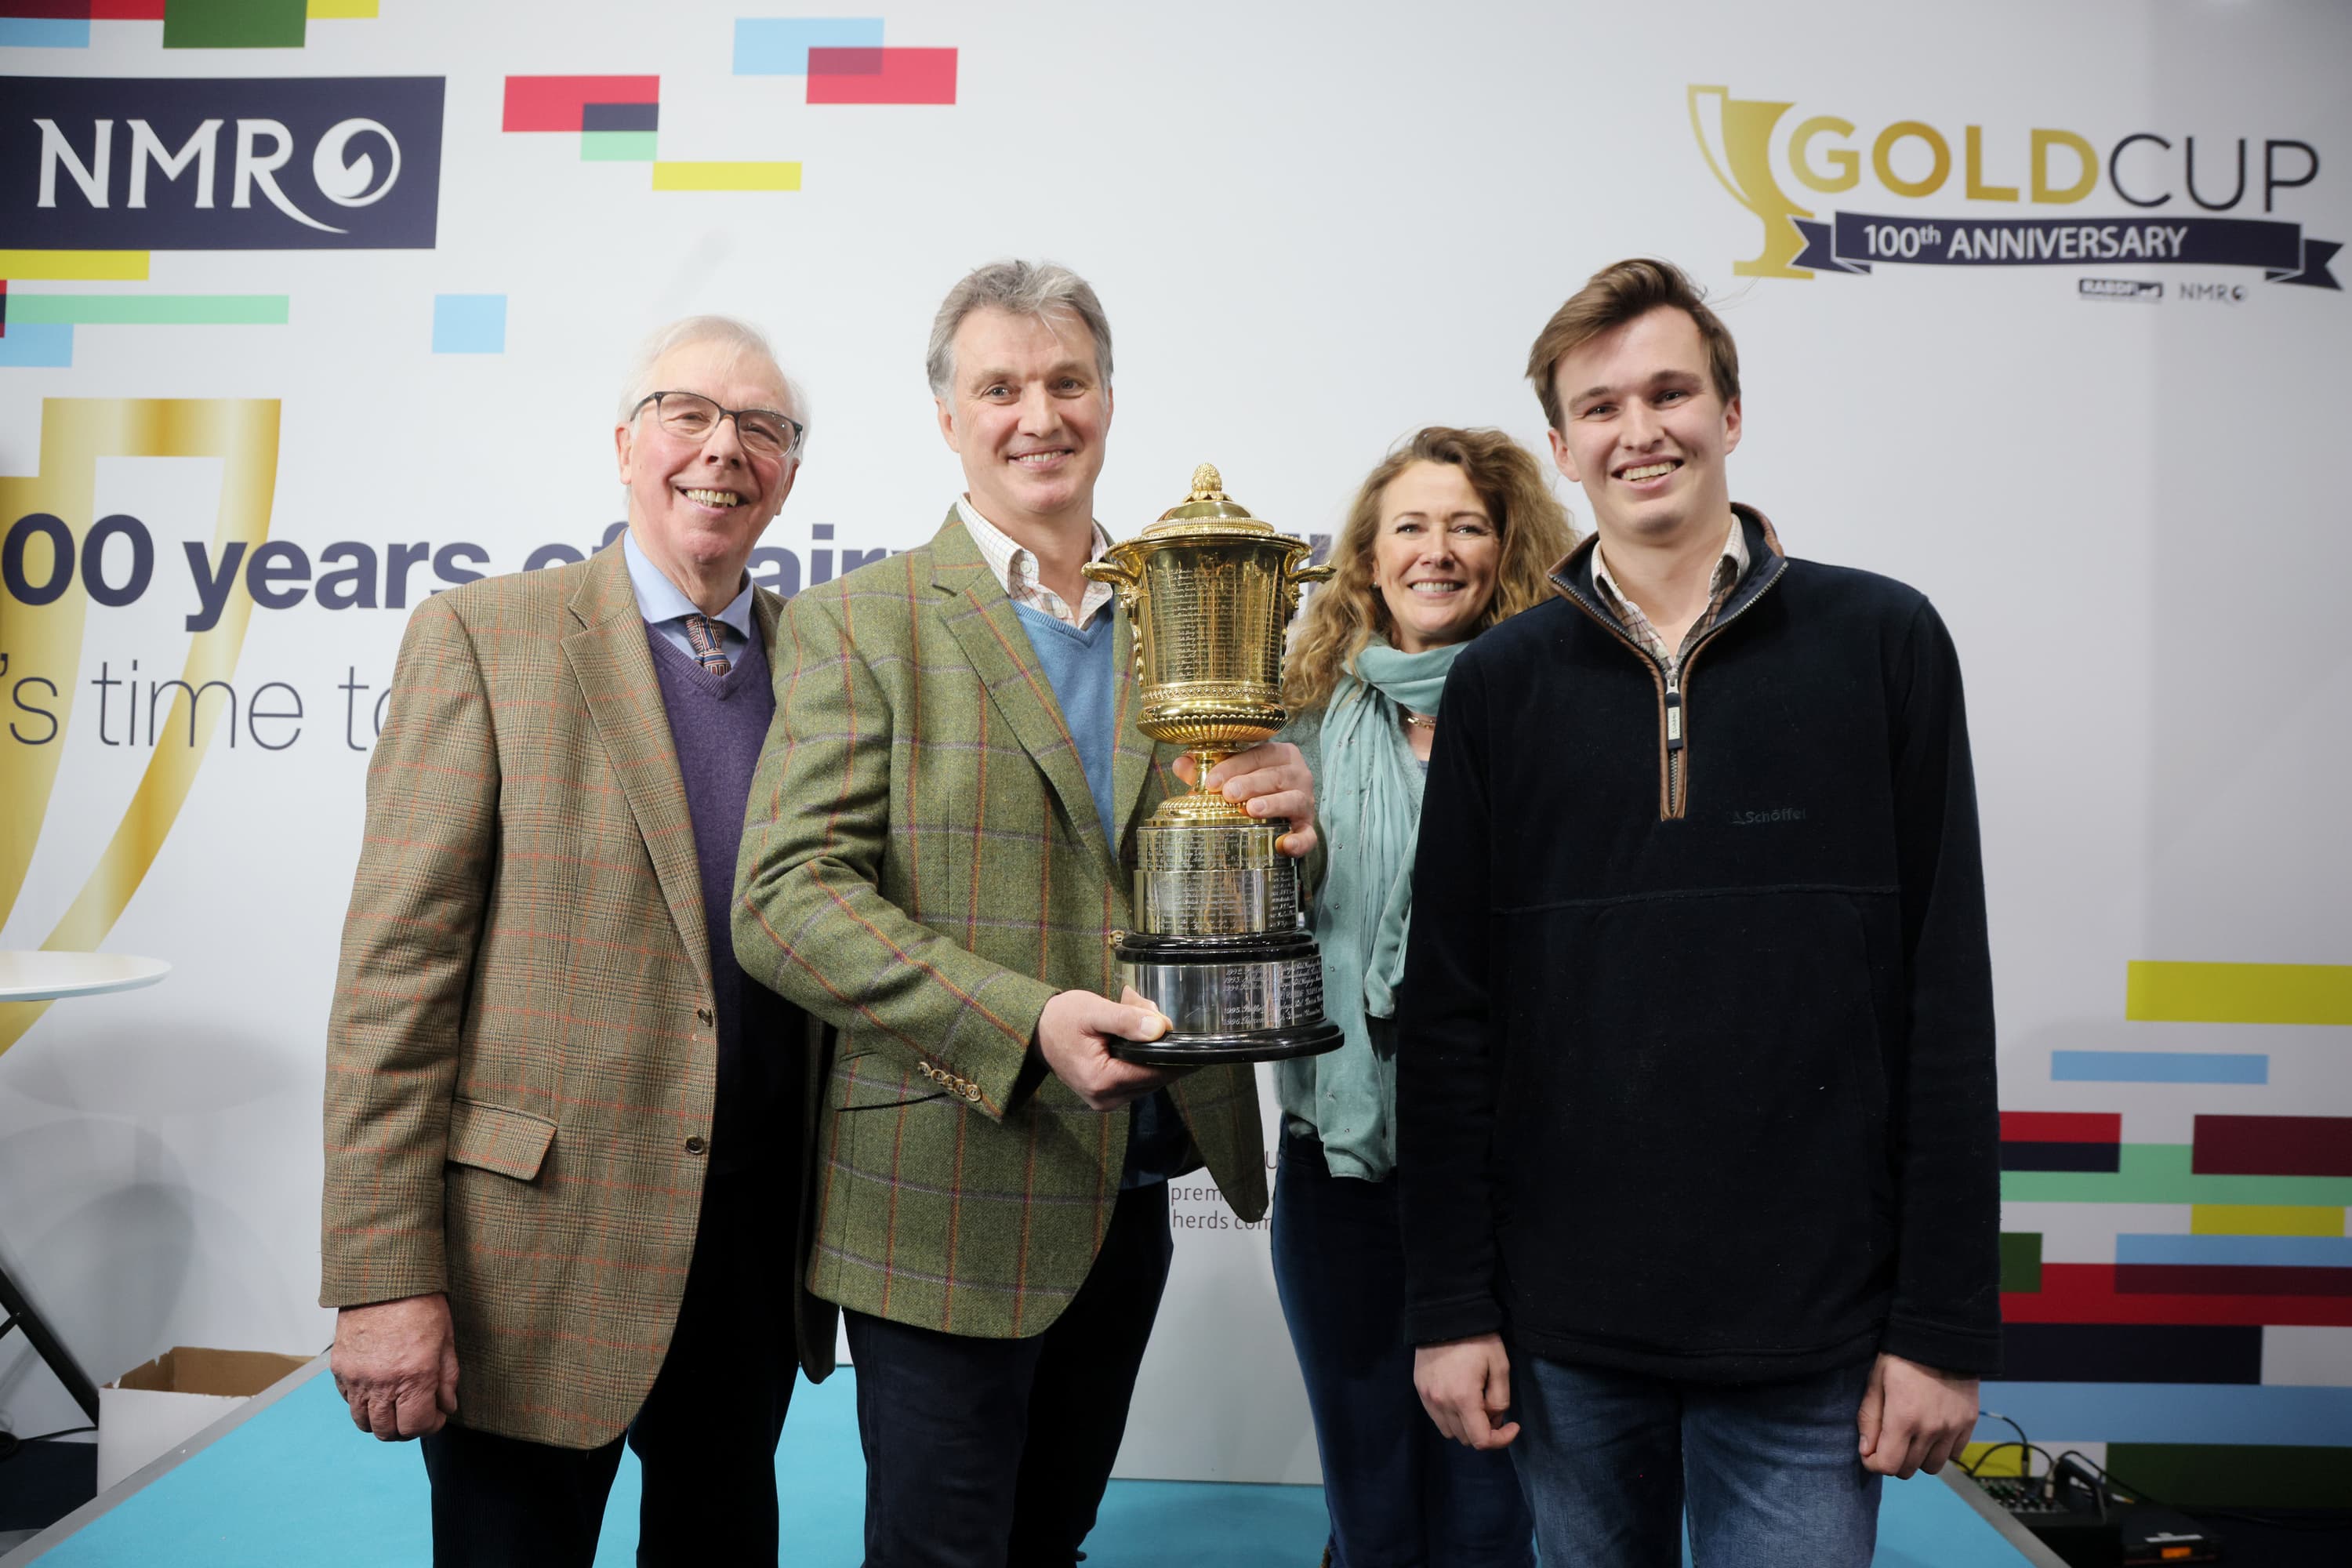 2020 NMR RABDF Gold Cup Winners - R Torrance & Son from Stapleford Abbotts, Essex. Pictured Robert, John, Lucy and Rory Torrance